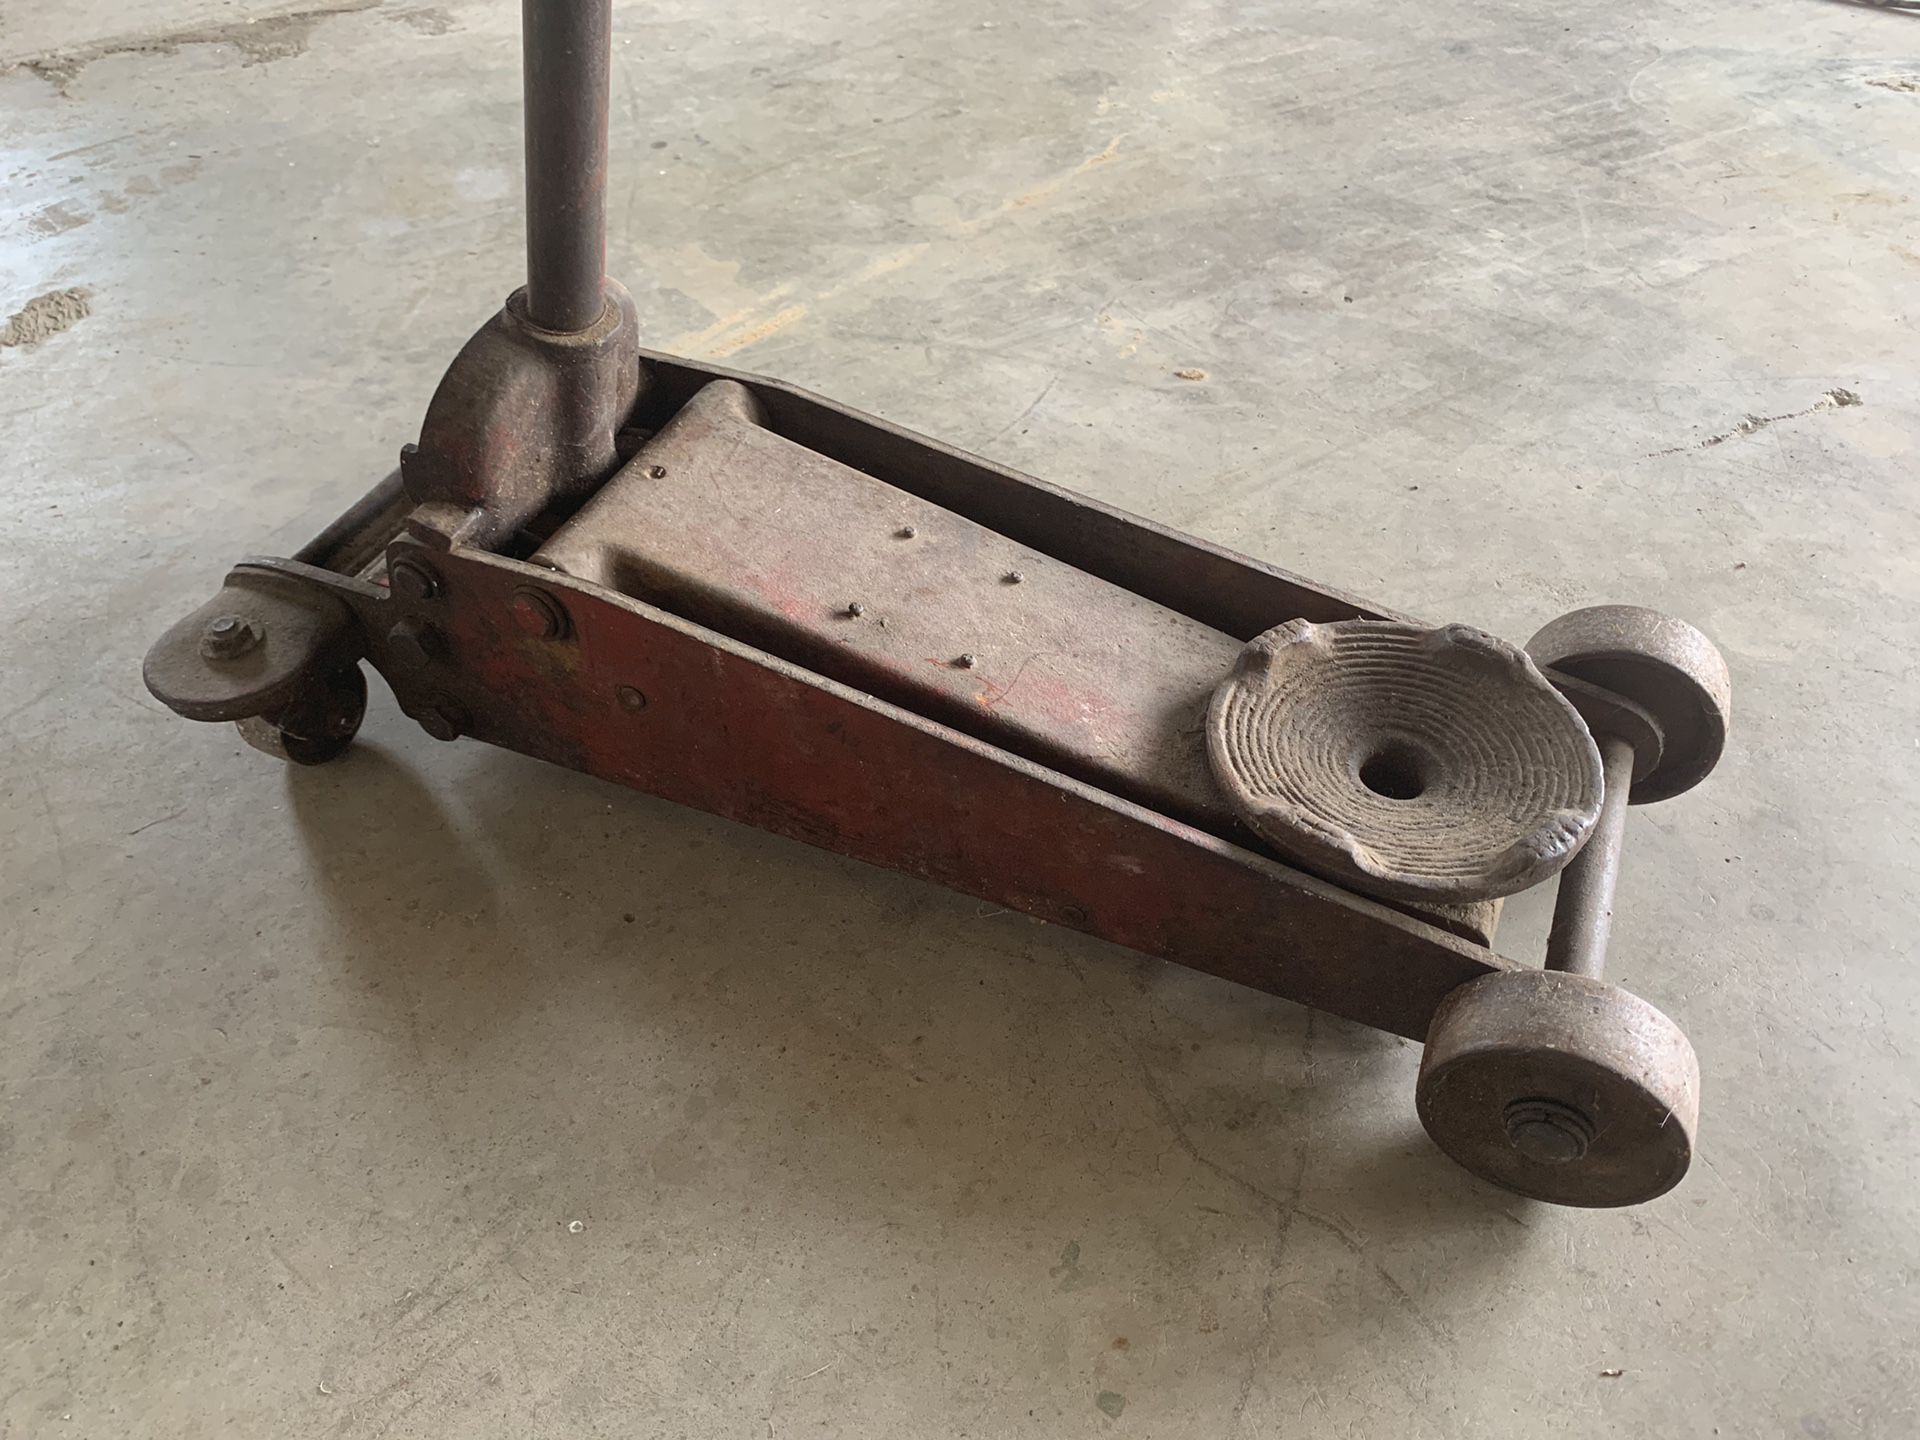 Old floor jack. All steel and super heavy. Is slowly releasing so will need repaired